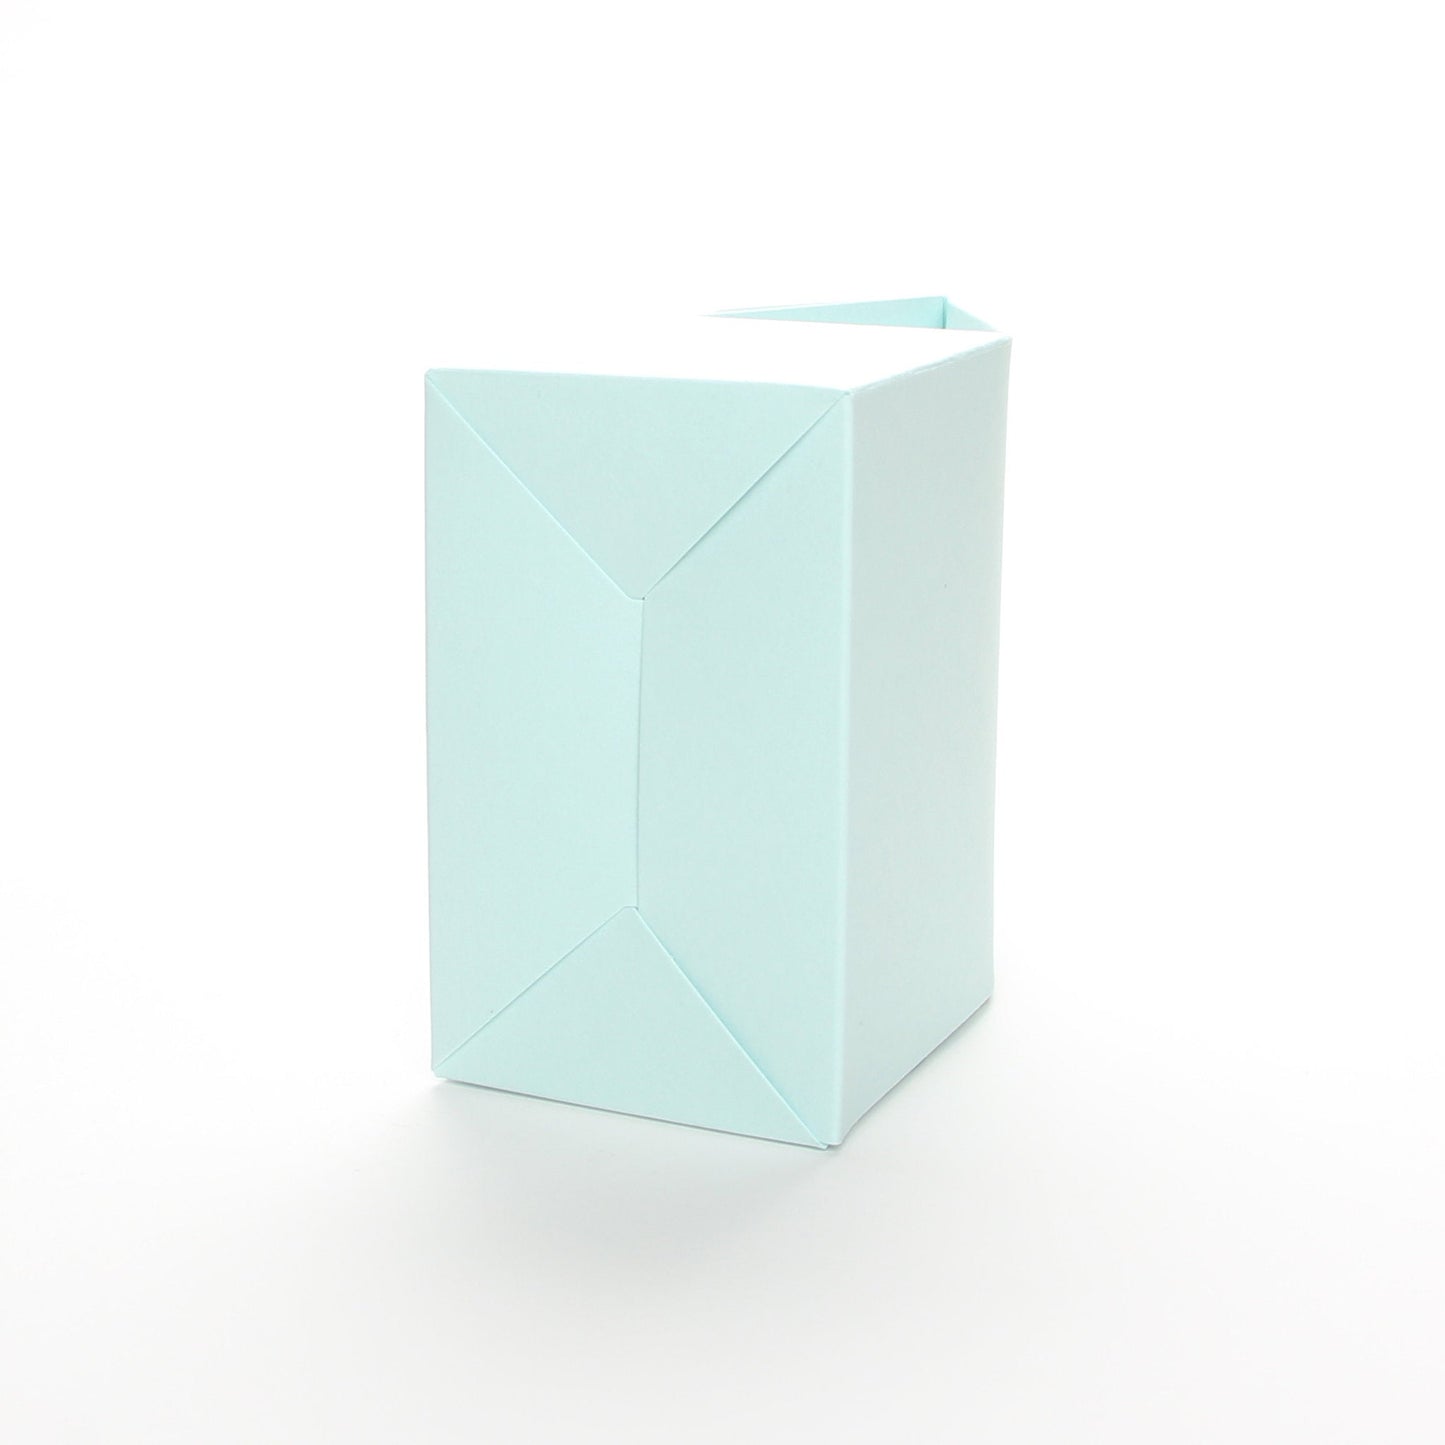 Bottom view of Lux Party’s light blue favor box on a white background.